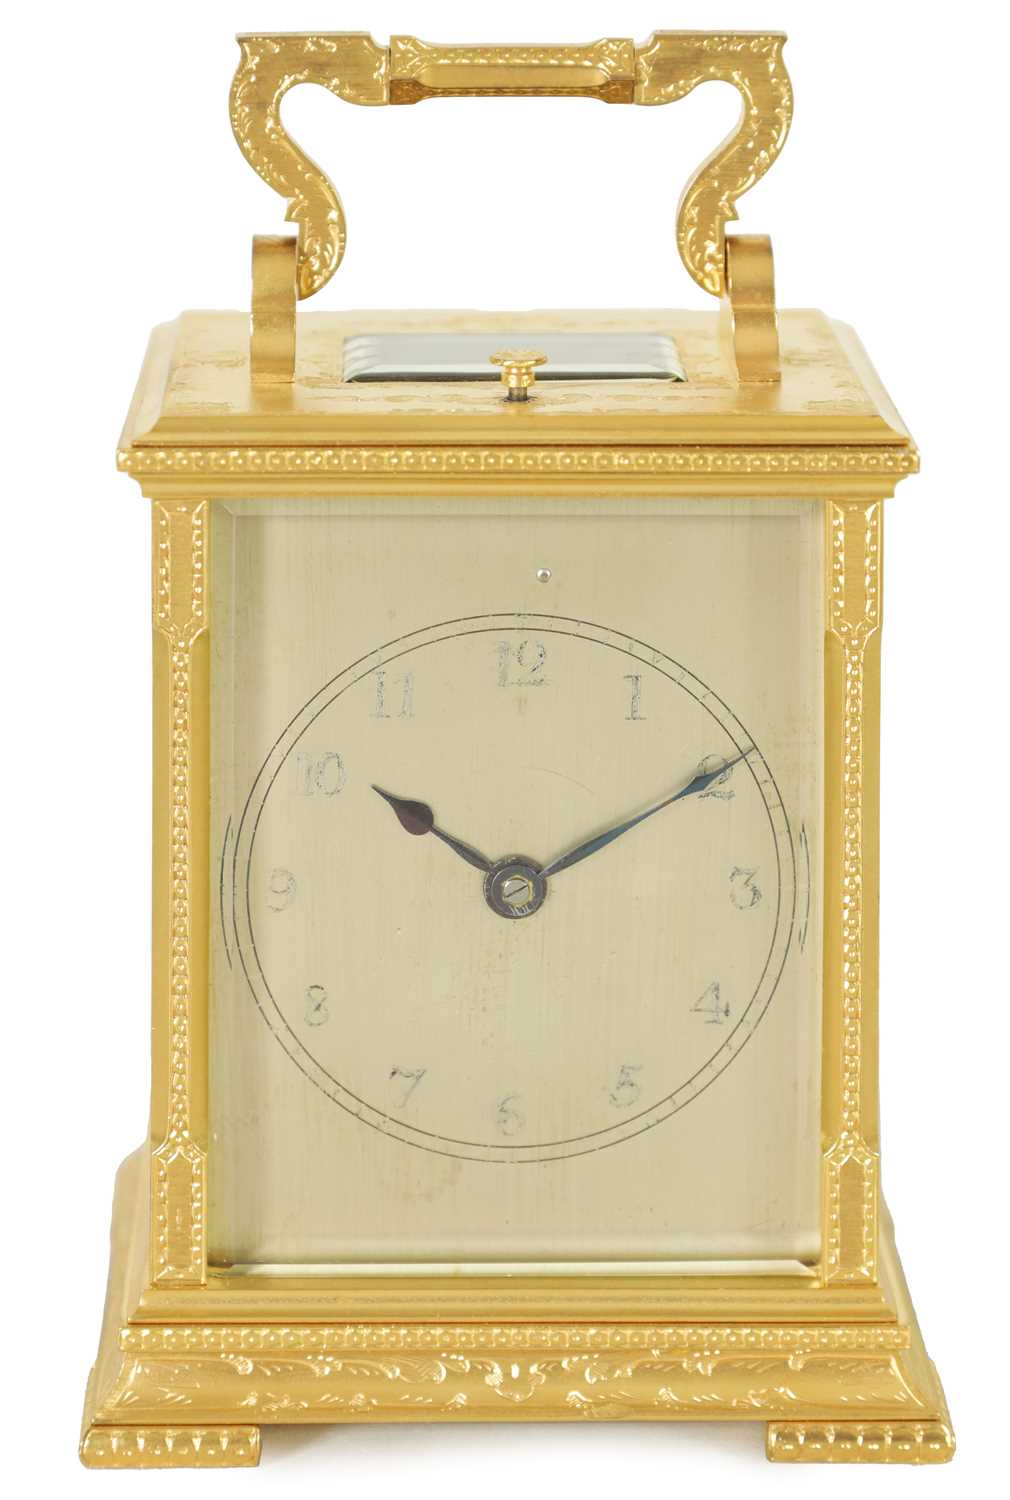 A FINELY ENGRAVED ENGLISH CASED REPEATING CARRIAGE CLOCK